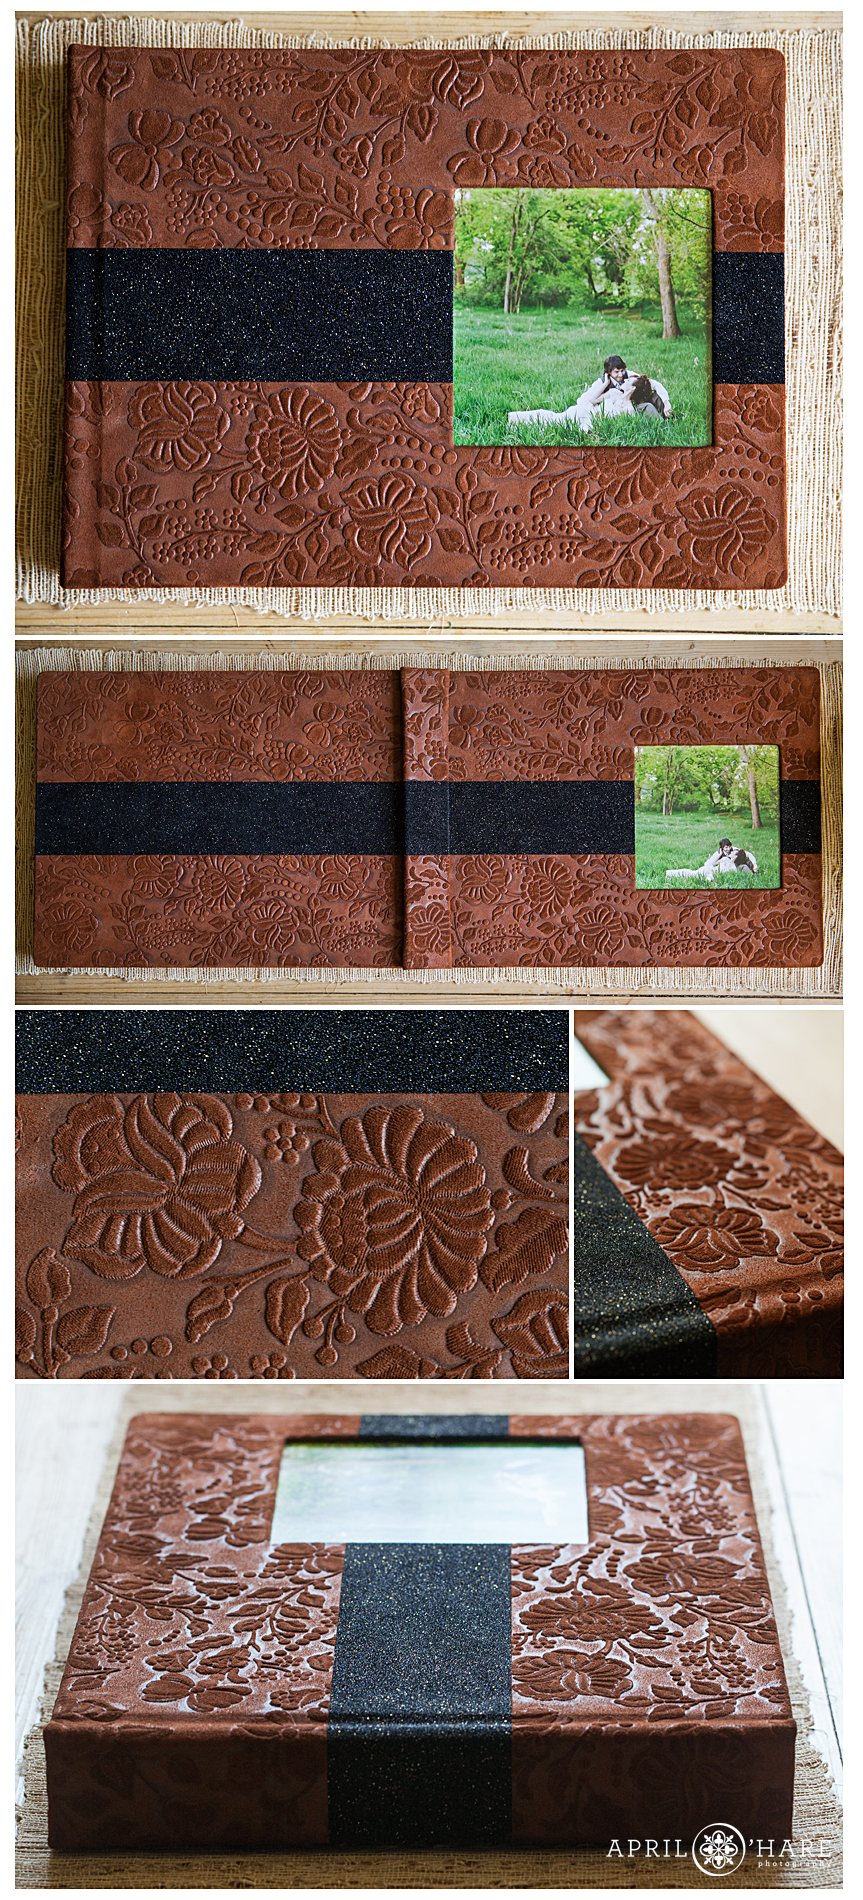 Brown Floral Wedding Album 12x16" from Finao using Black Glitterati Accent Stripe with Brown Floral Wallflower Leather 